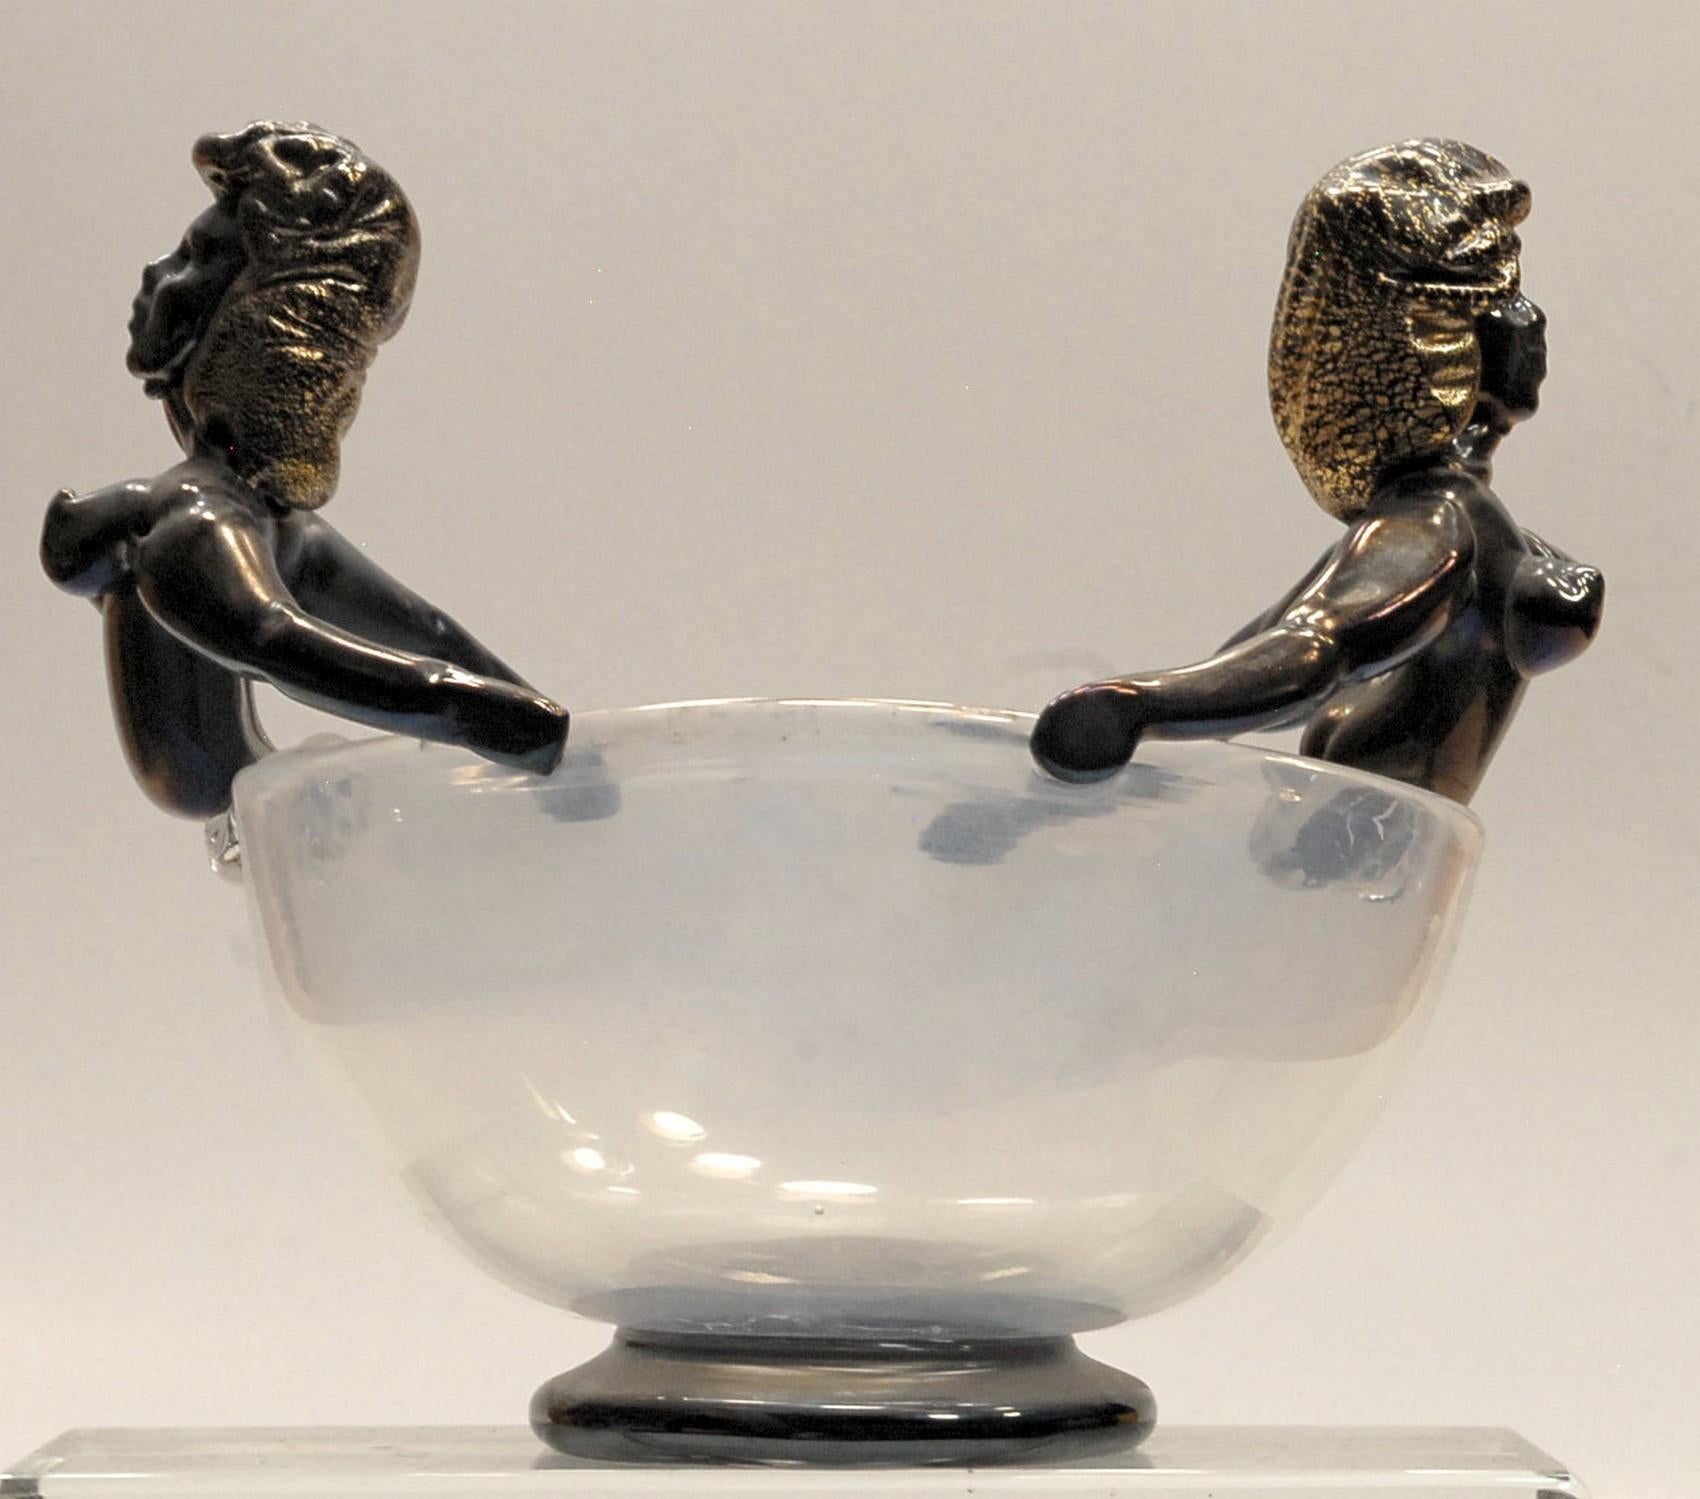 This shows the Classic Murano figurine head with the casque hair position. The bowl has been waved to hot attach the two busts that are connected to the bowls also with the arms in a figurehead position.
Bowl is in clear and rest in black glass